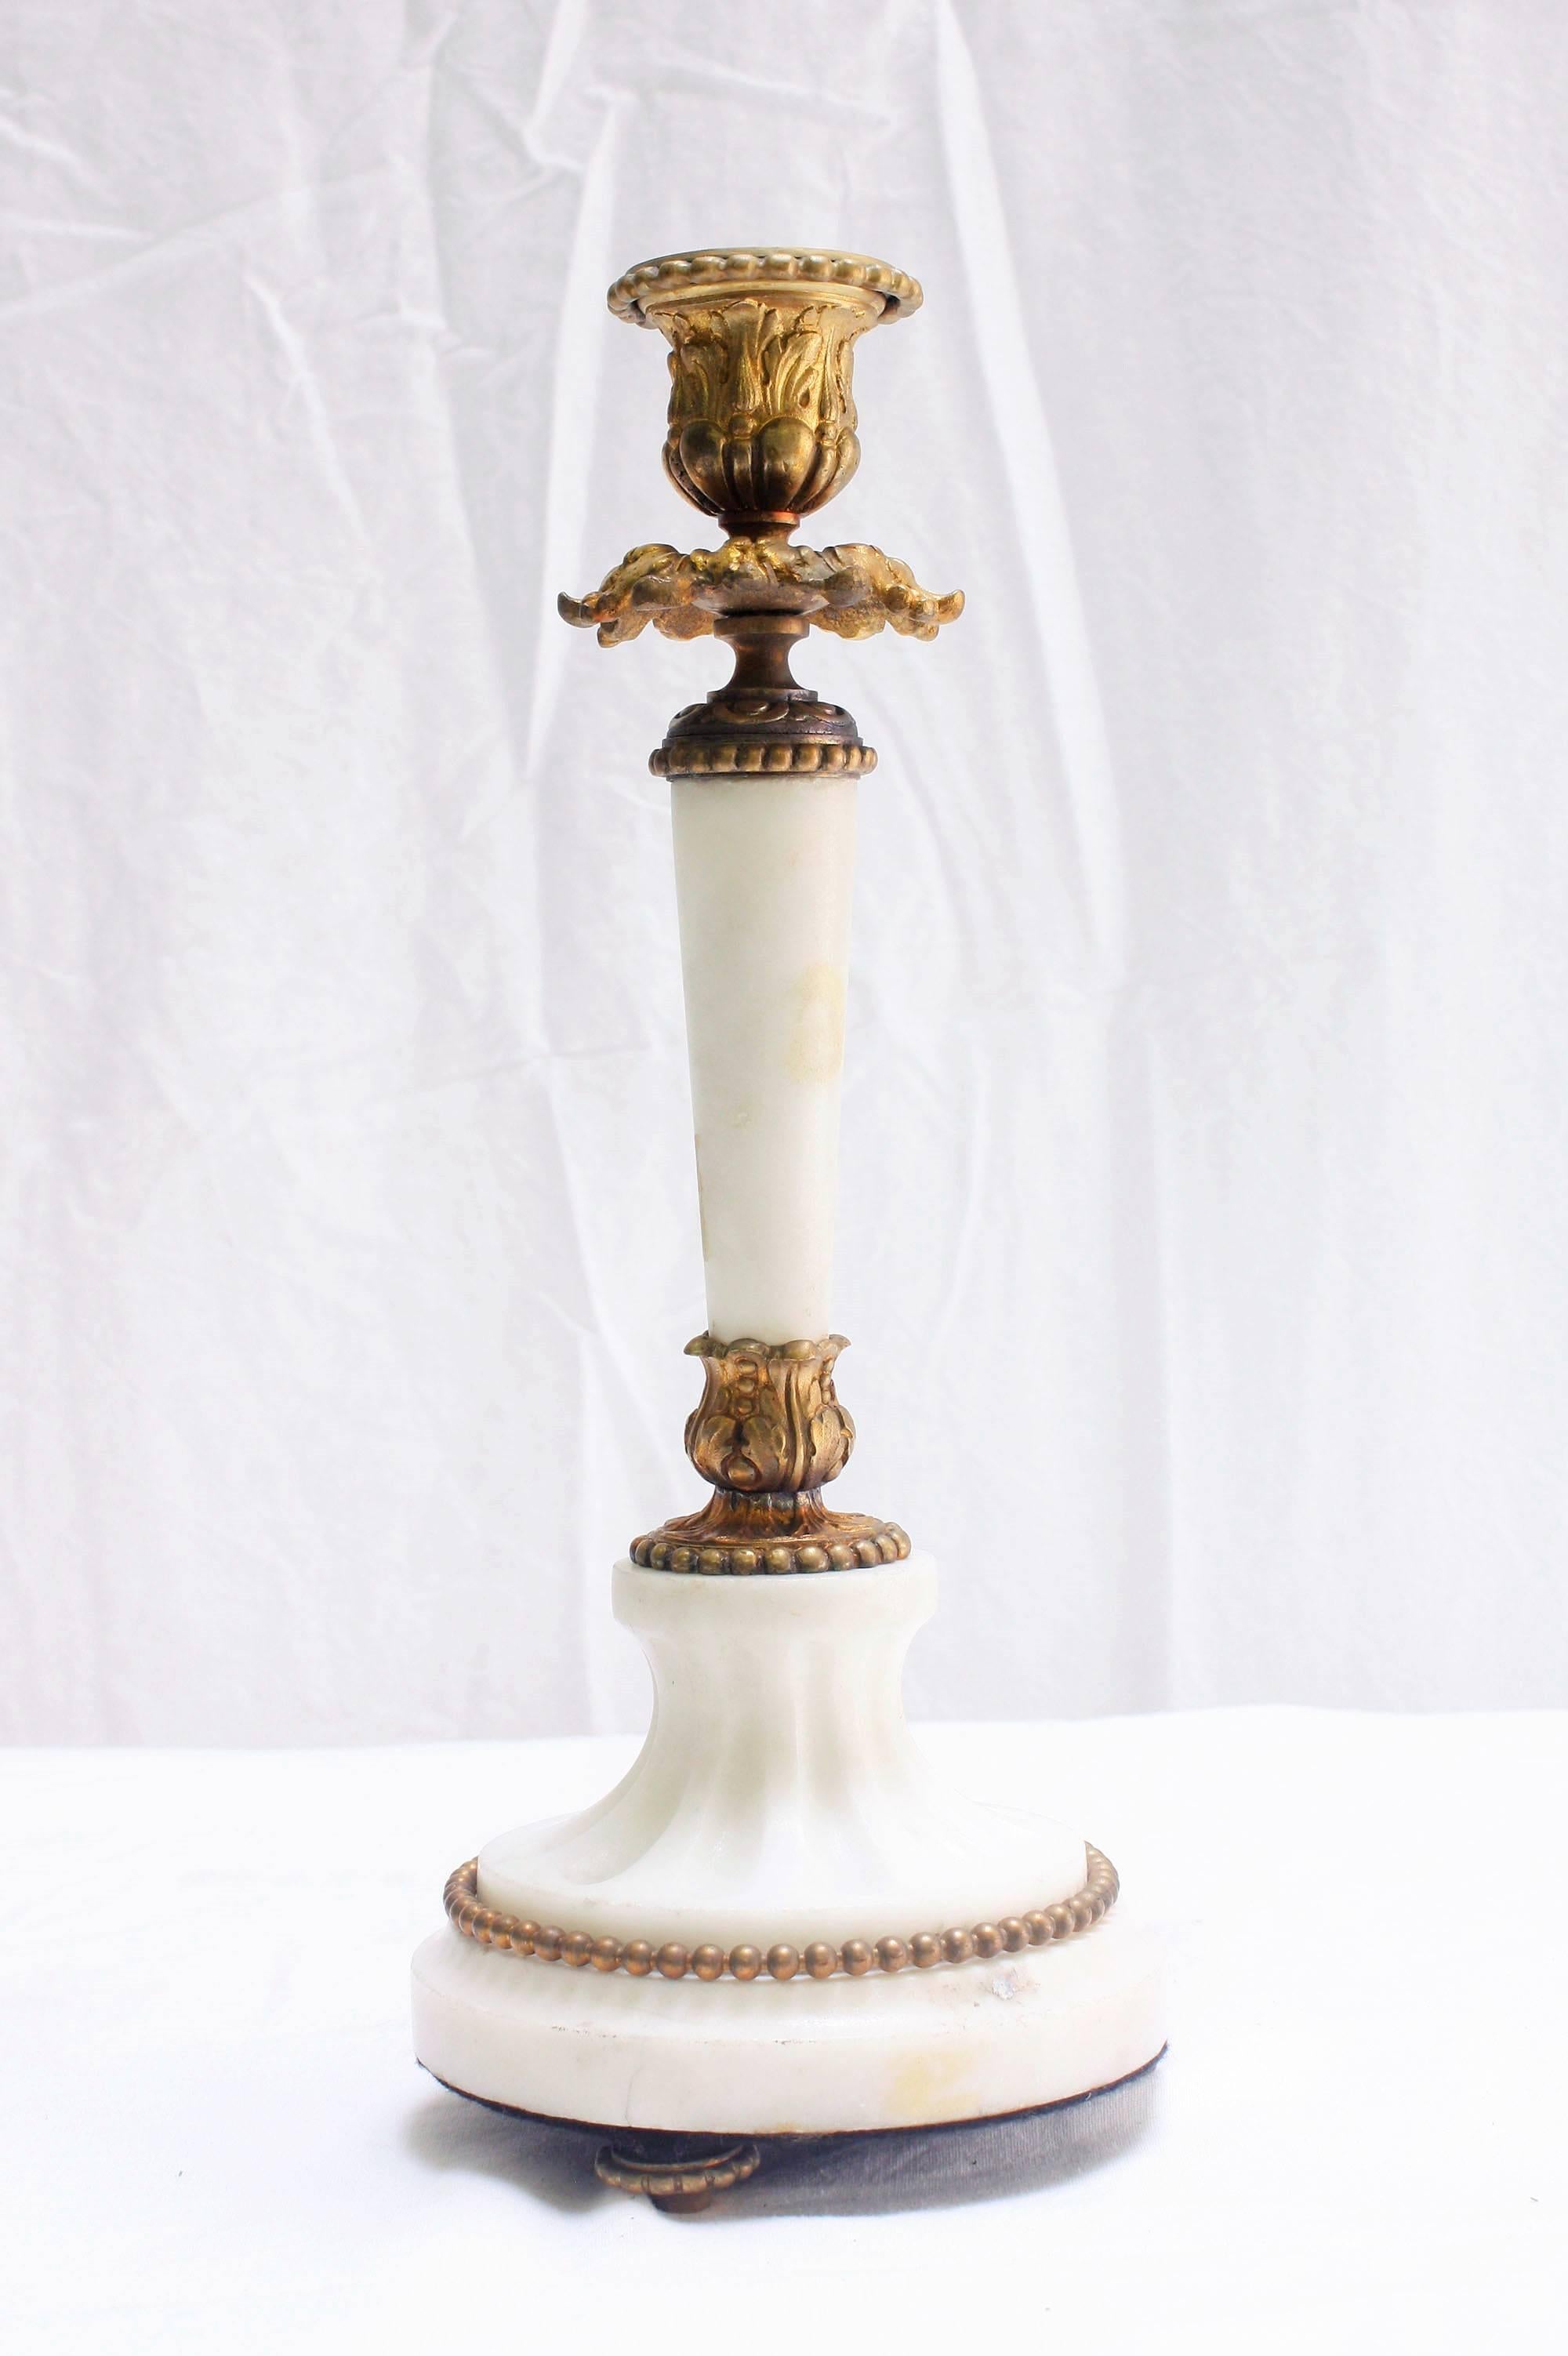 This pair of 1880s, French Louis XVI-style candlesticks are made of marble and bronze. The shaft and base of the candlesticks feature carved white marble that is unpolished. The base is circular and has fluted details. The bronze accents are